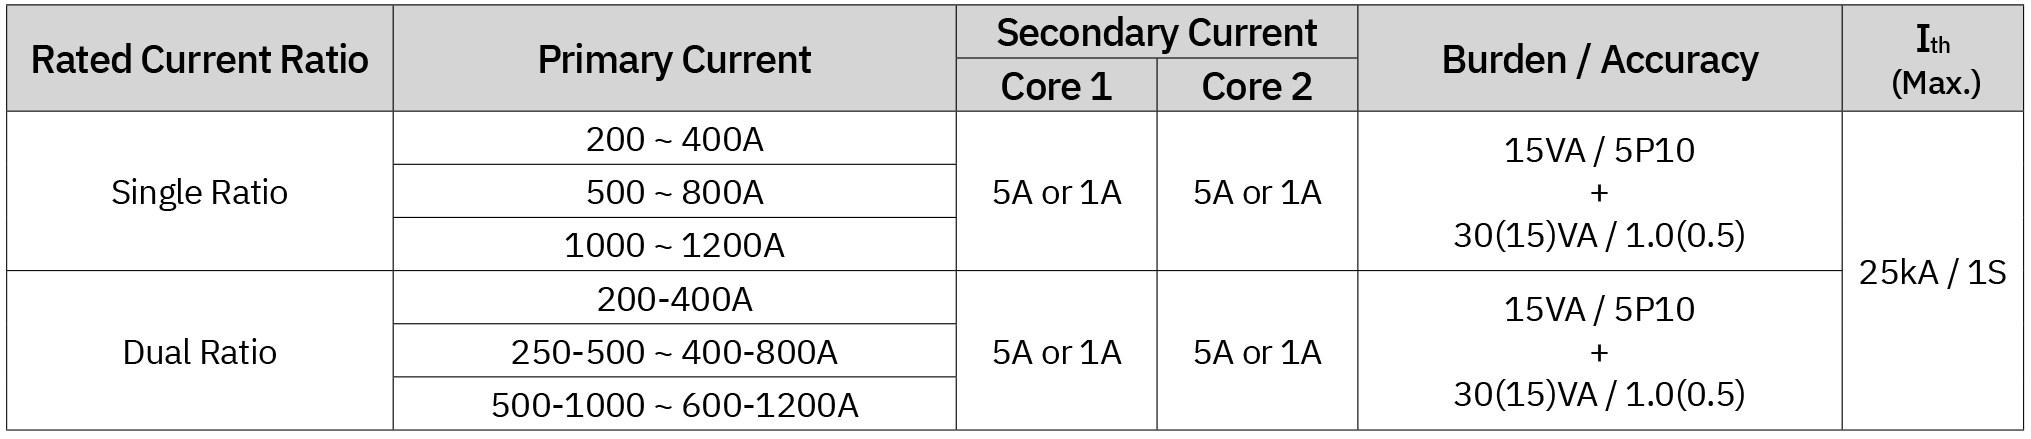 Specification Table for 3.6 kV Two-Core Epoxy-Cast Current Transformer (ER-3C)